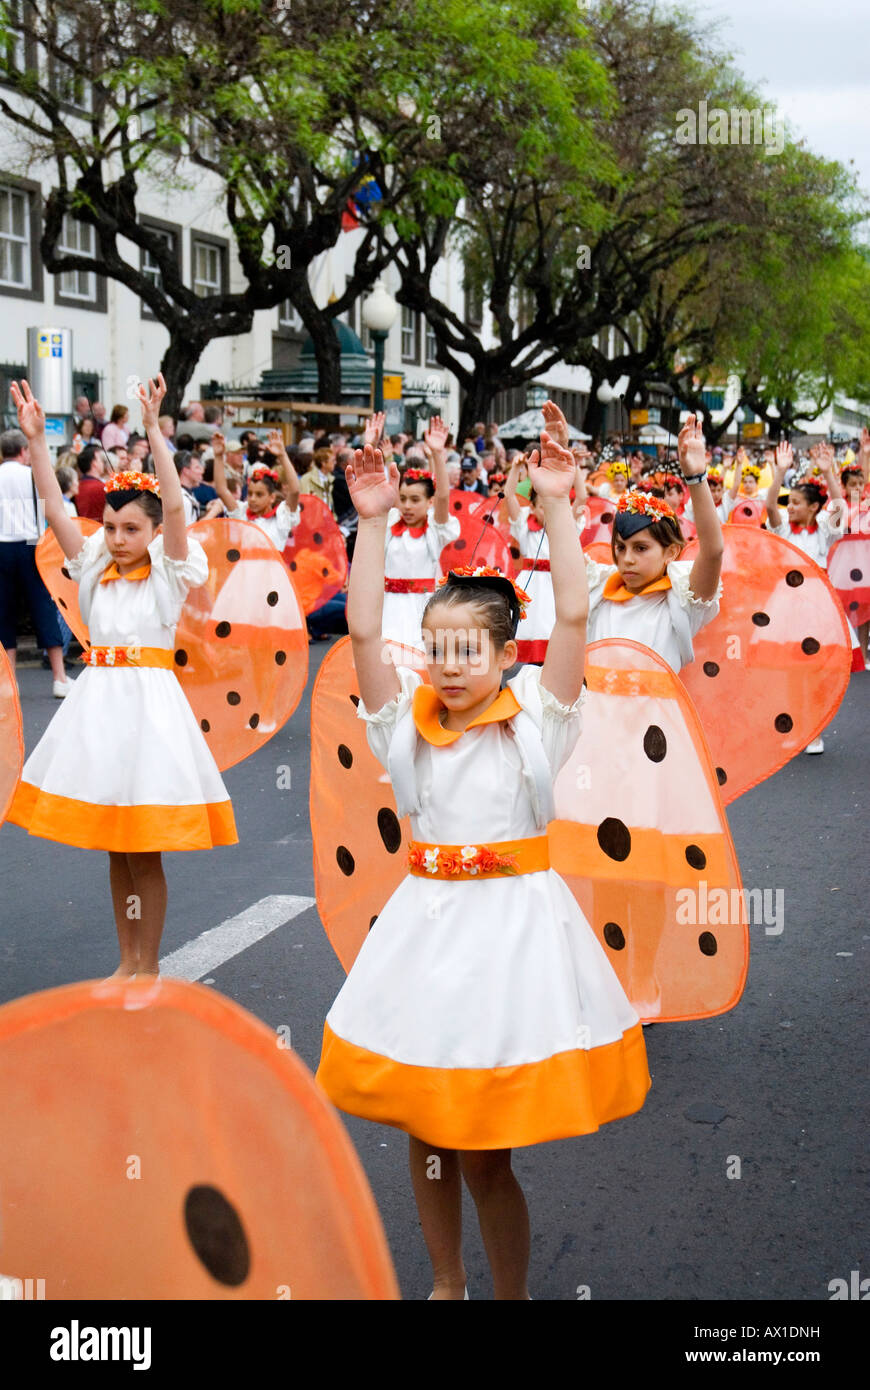 Flower procession, April Flower Festival in Funchal, Madeira, Portugal, Europe Stock Photo